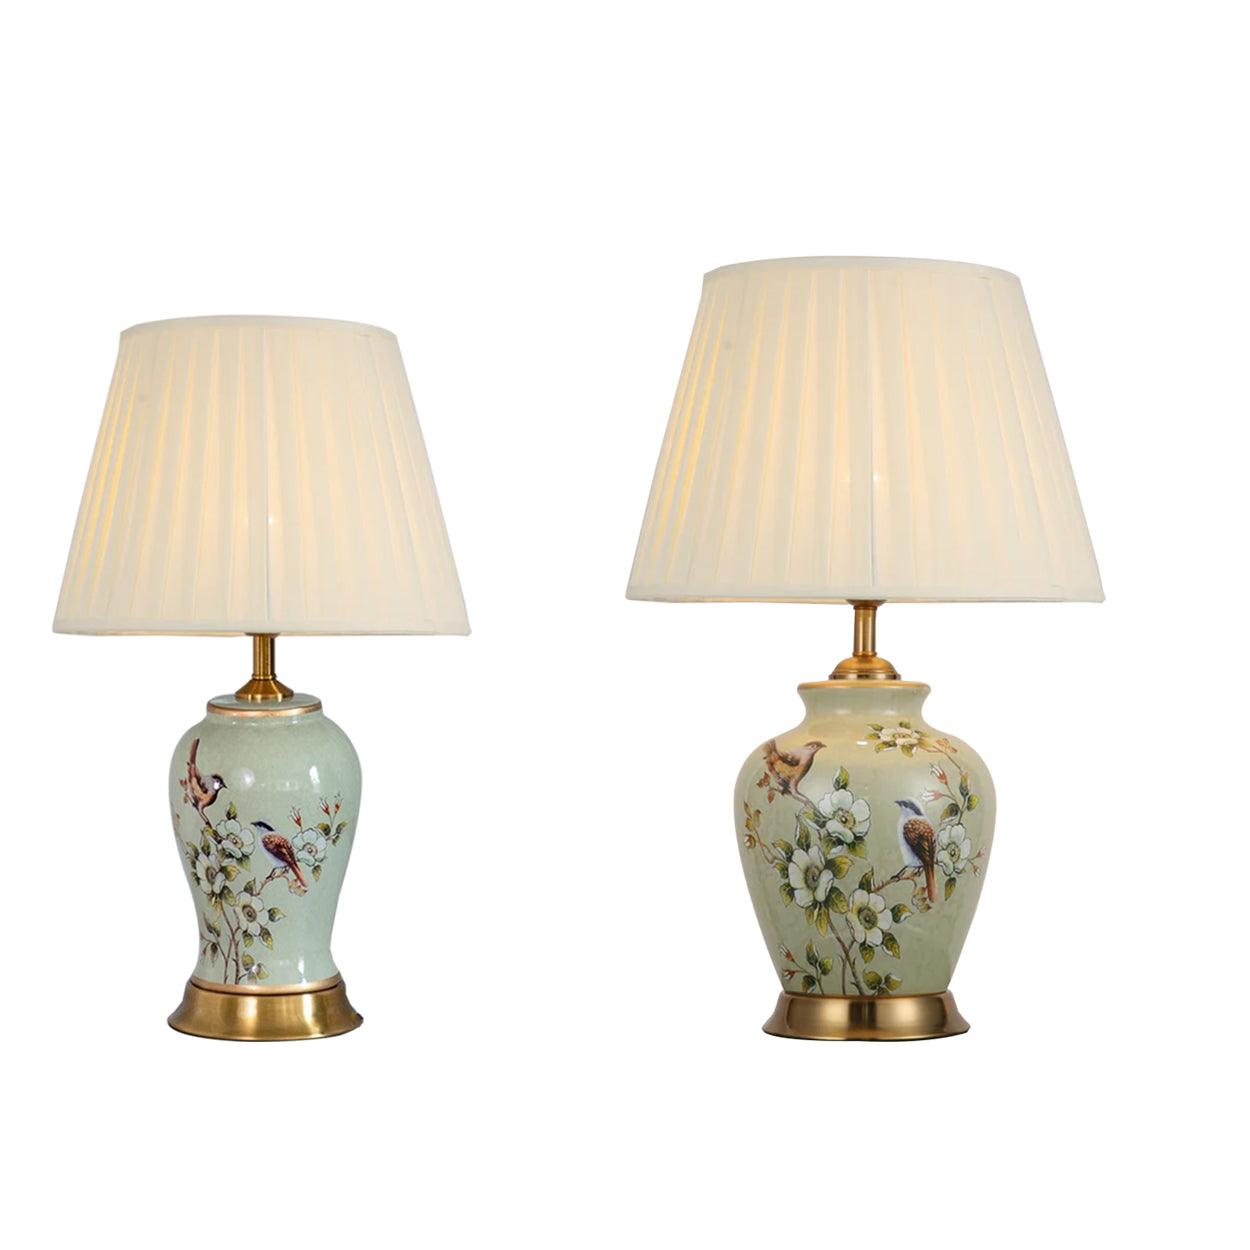 CHIRP FLORAL PATTERN CERAMIC TABLE LAMP SLIM AND FAT - Ankur Lighting